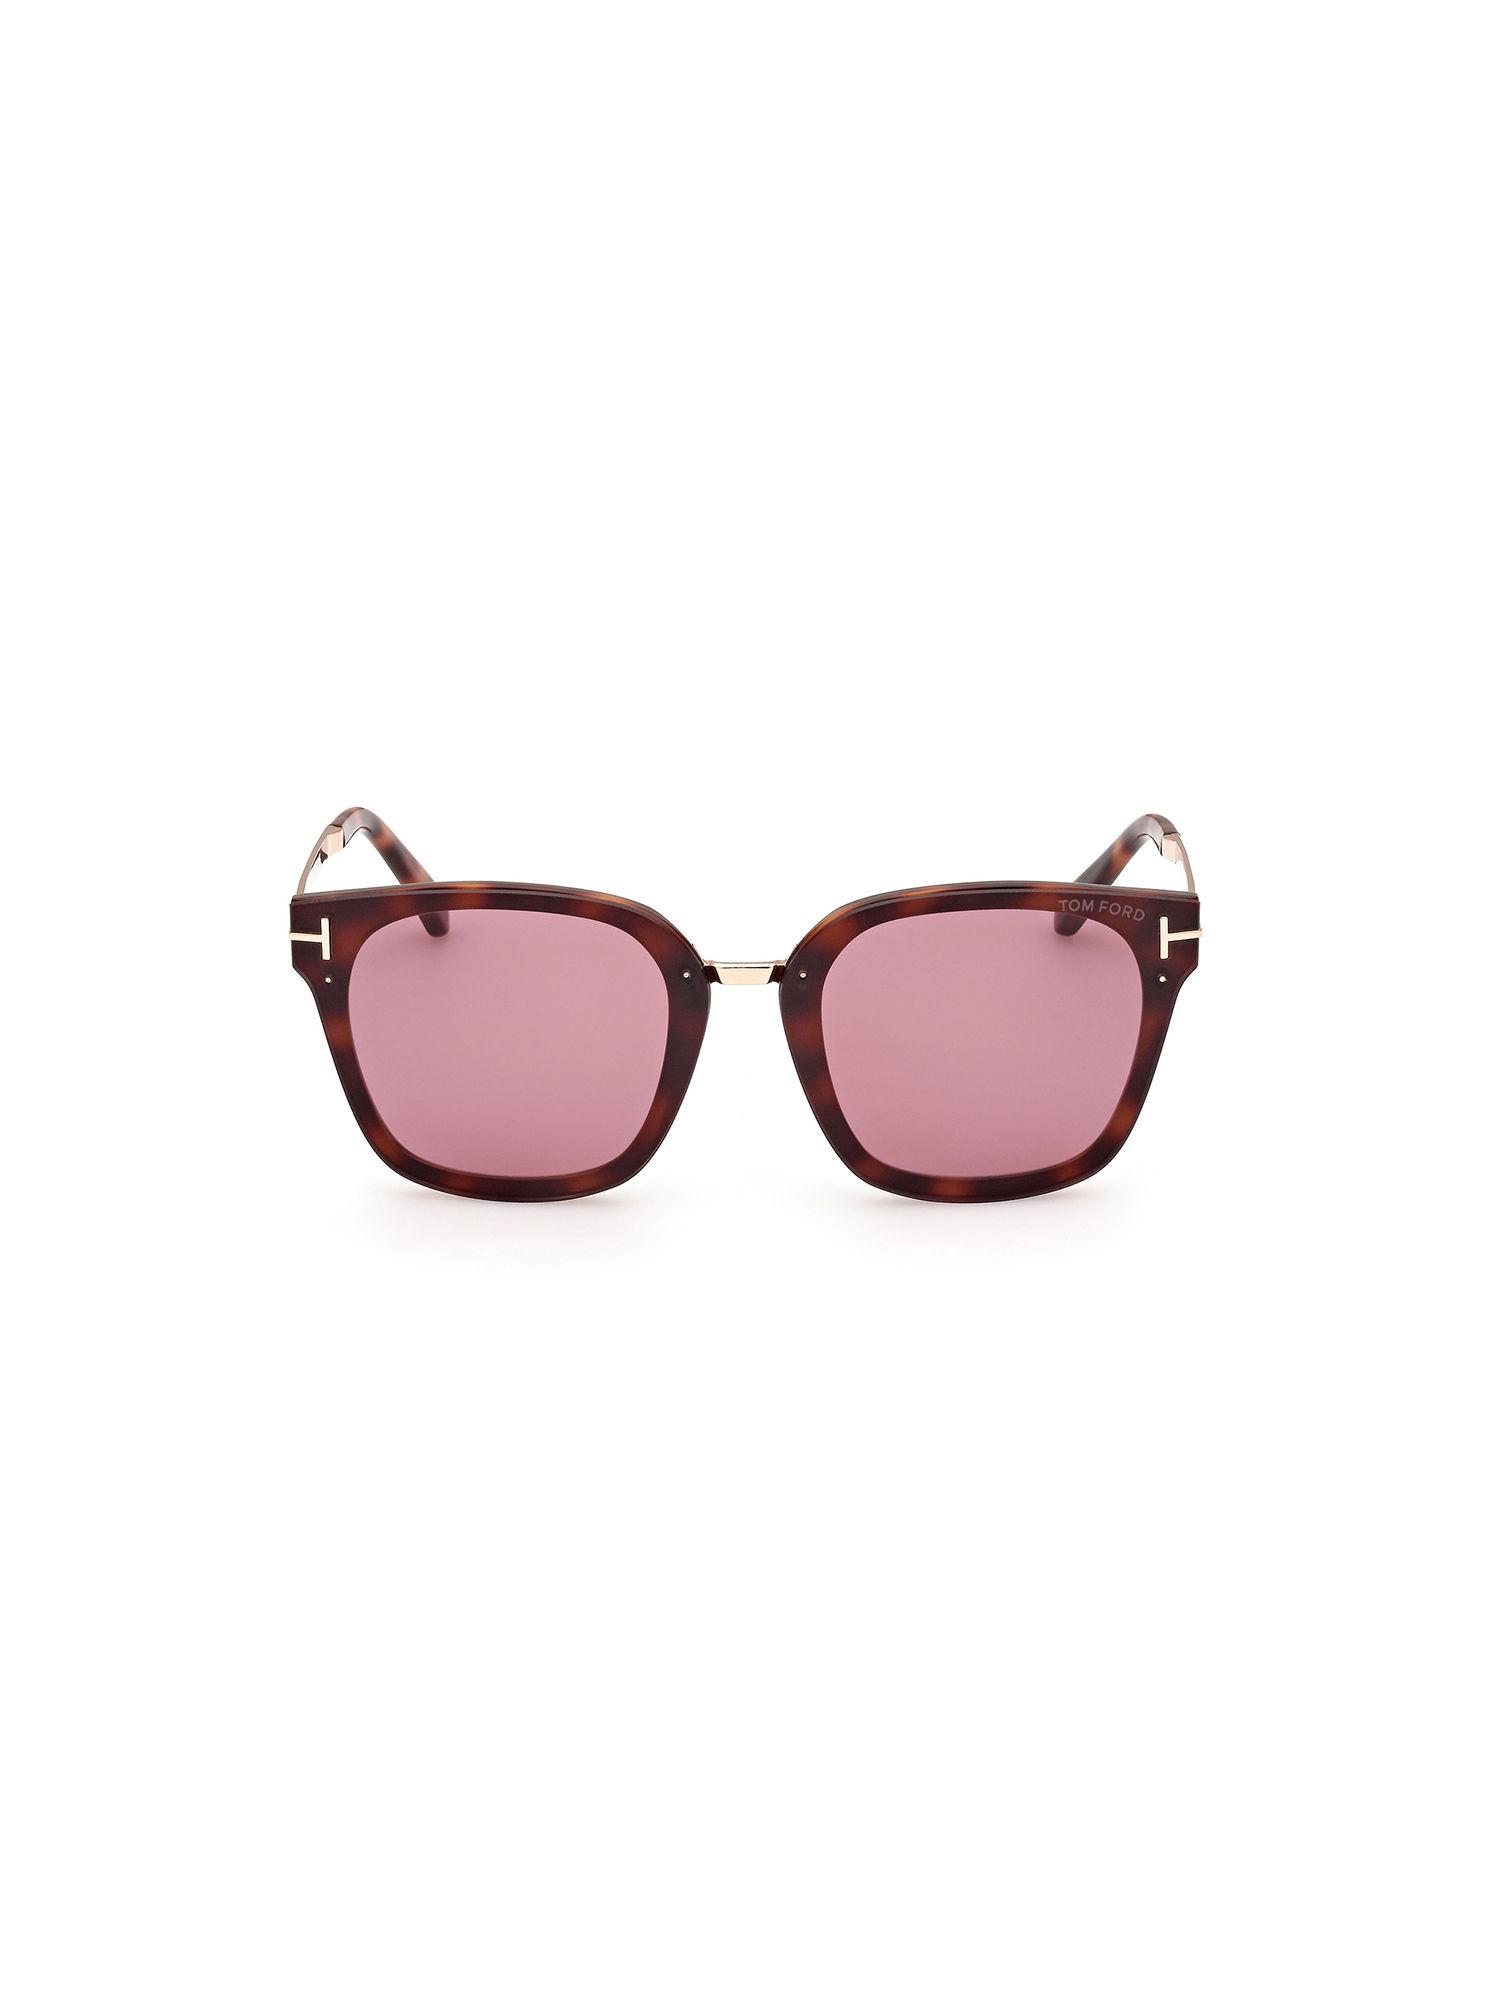 square pink sunglasses (ft1014 68 52y) (68)